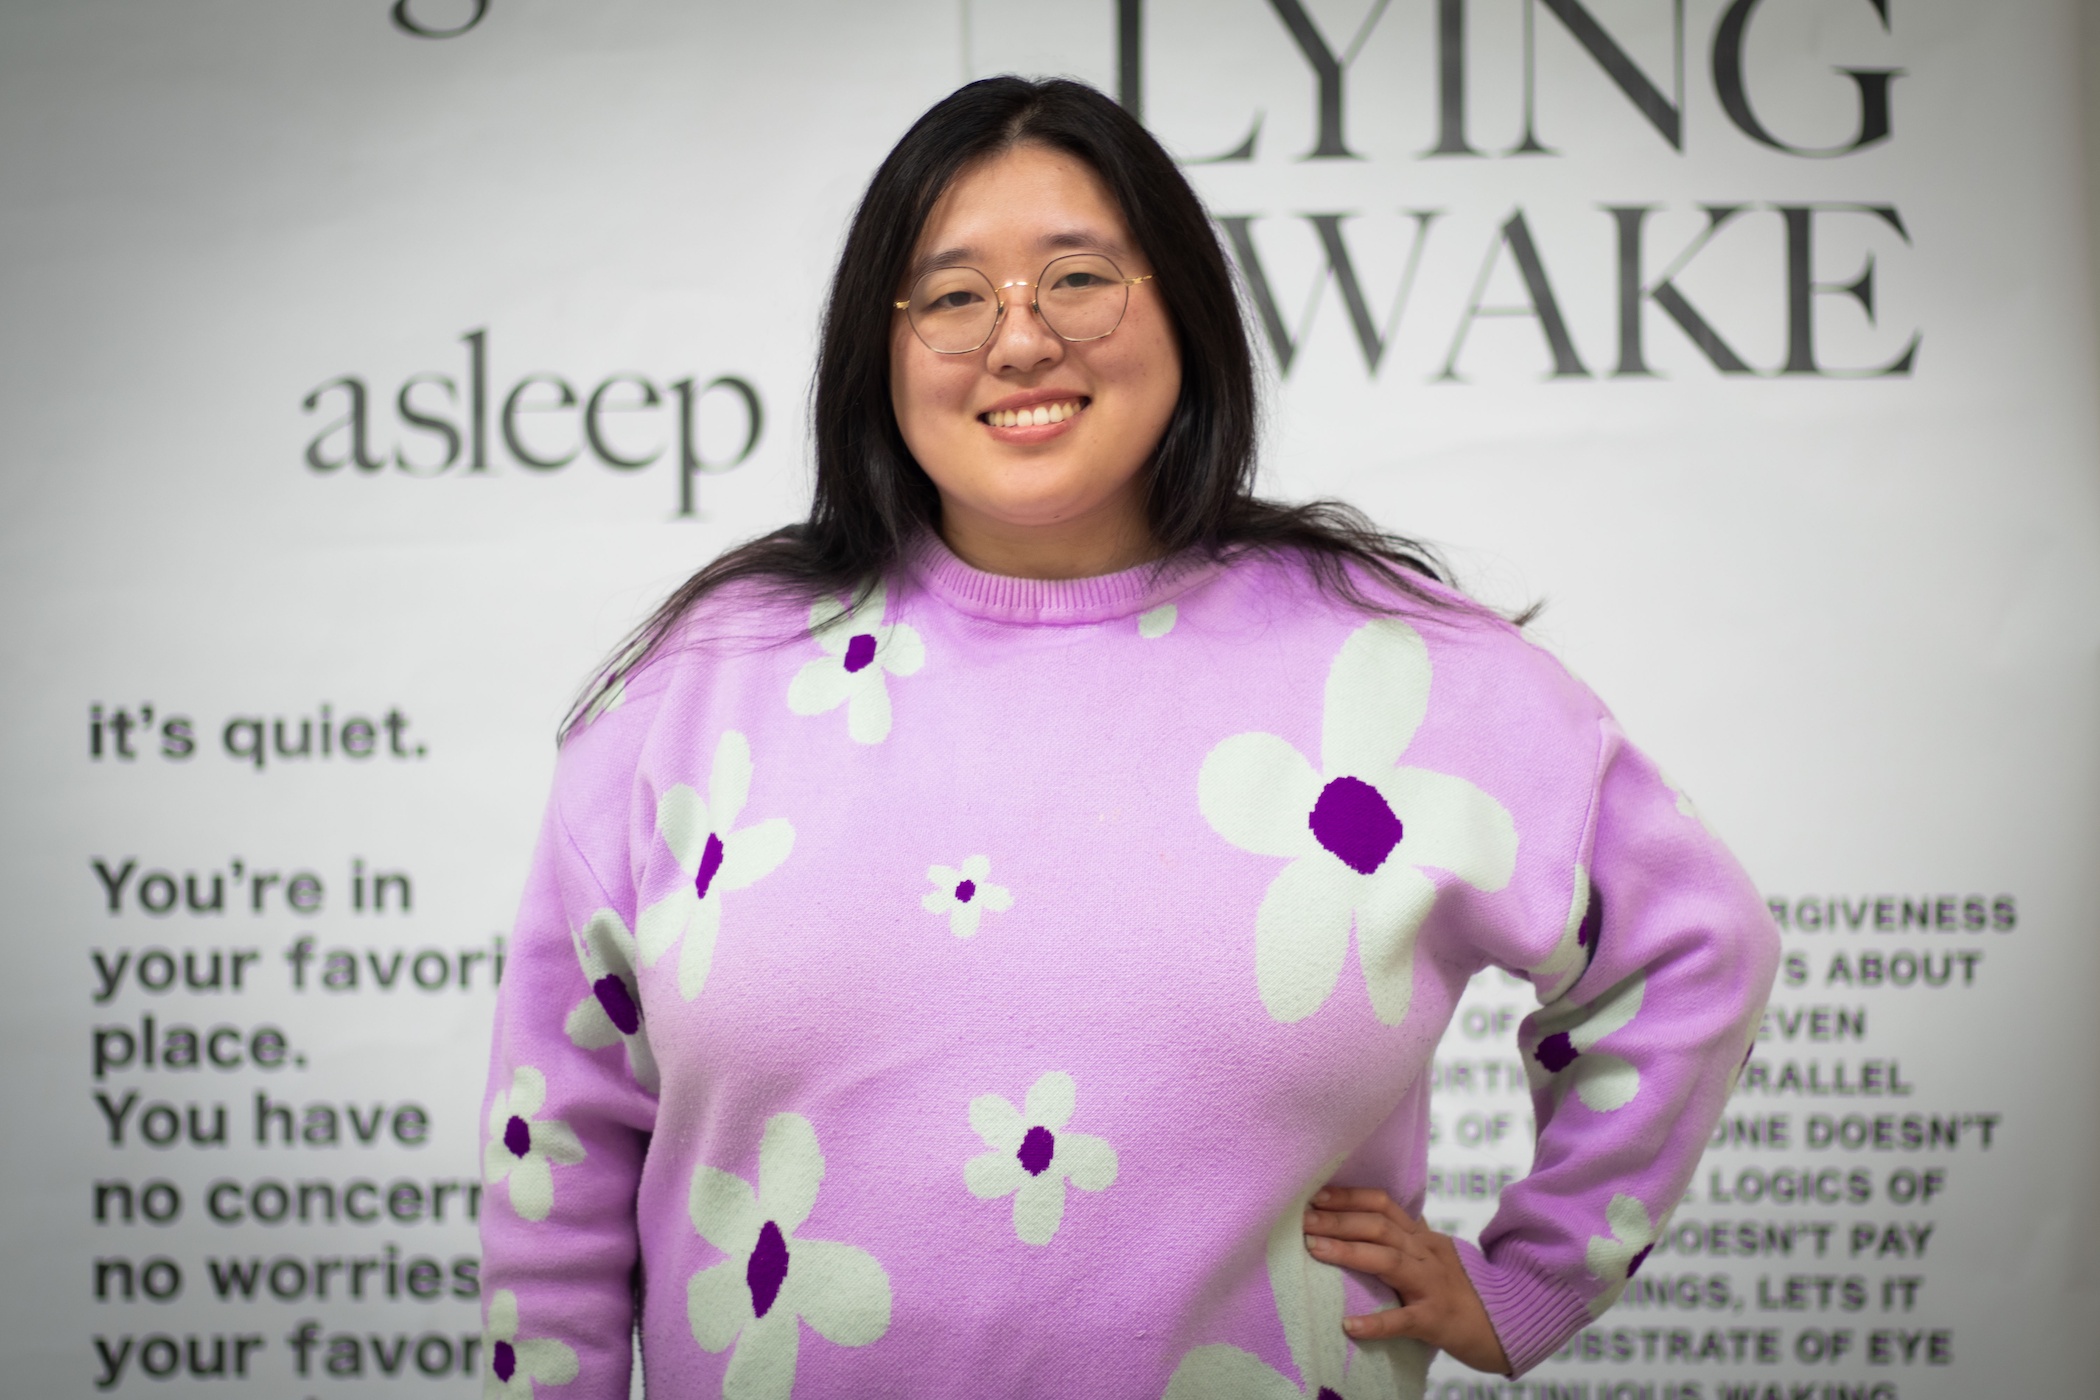 woman with glasses and long dark hair in lilac sweater with abstract flower designs standing in front of large text on wall